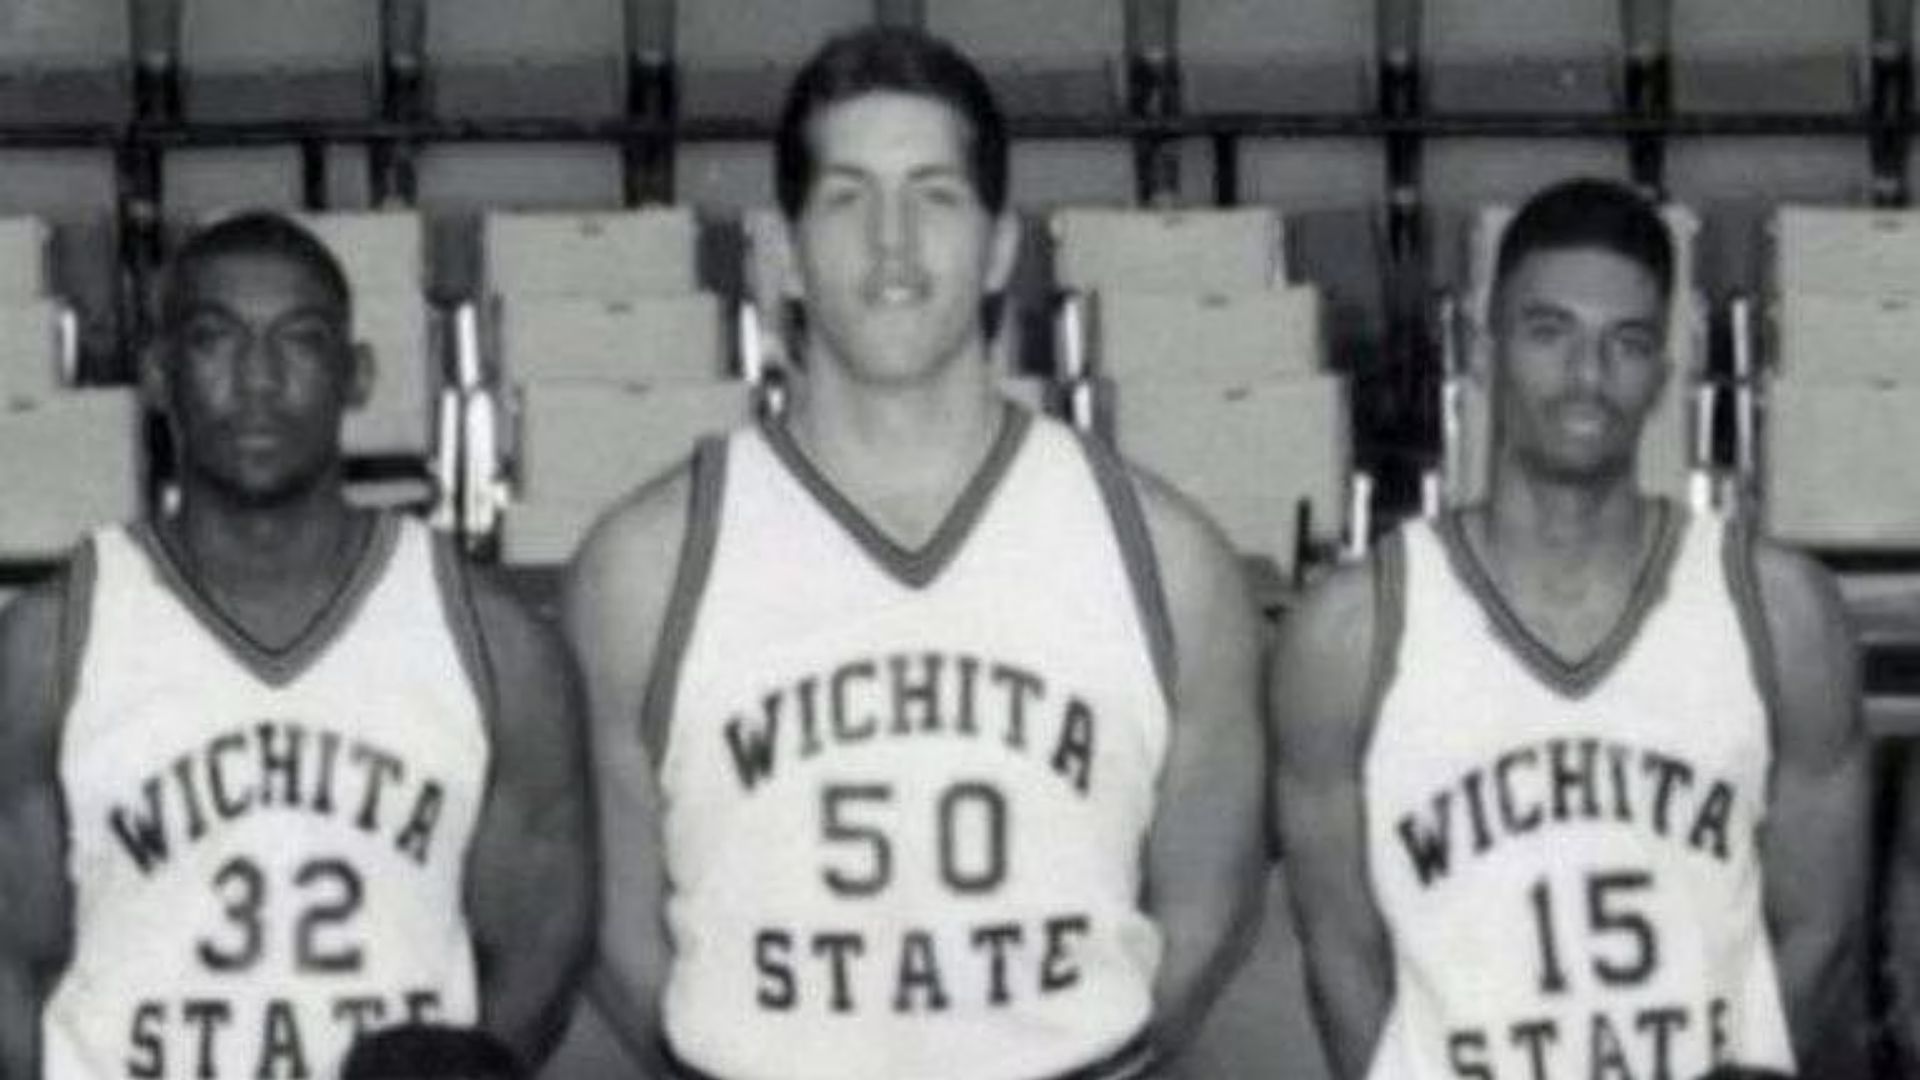 The Big Show during his collegiate days at Wichita State